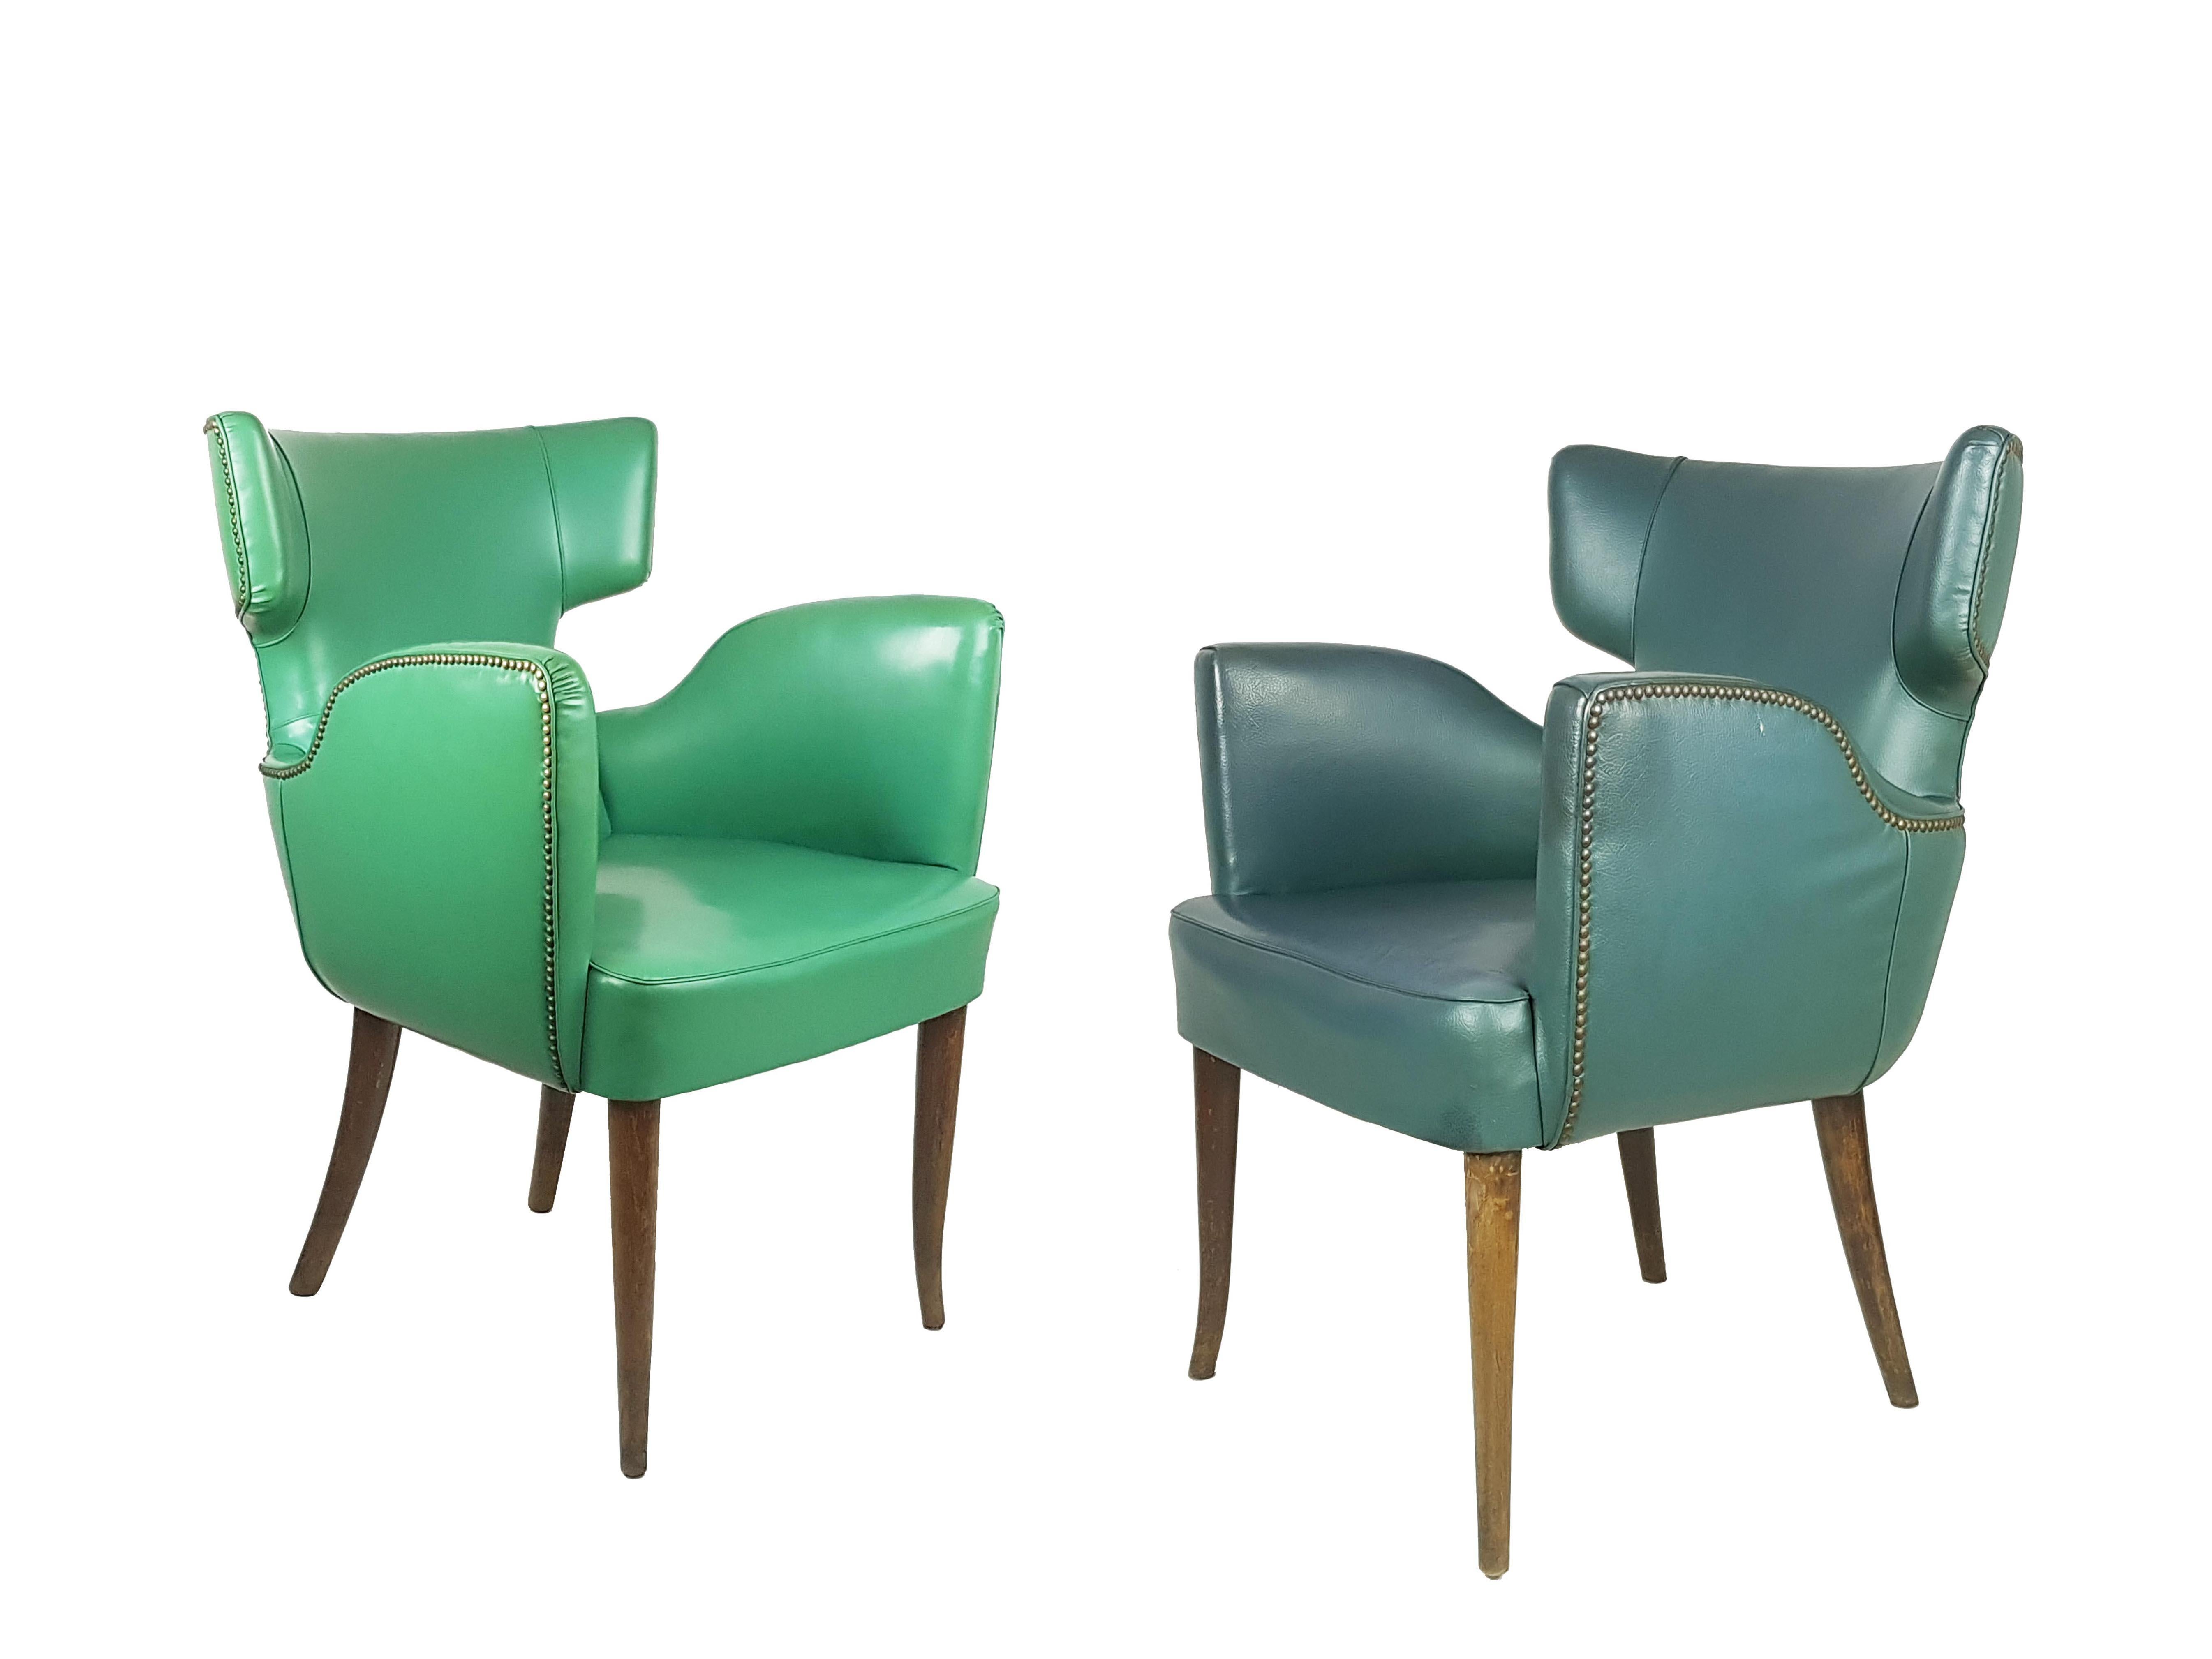 This beautiful and rare pair of light & forest green skai & wood armchair was produced in Italy in the 1950s. Its design resembles similar products by Melchiorre Bega, Paolo Buffa or Guglielmo Ulrich. Despite they belong to the same model, they have